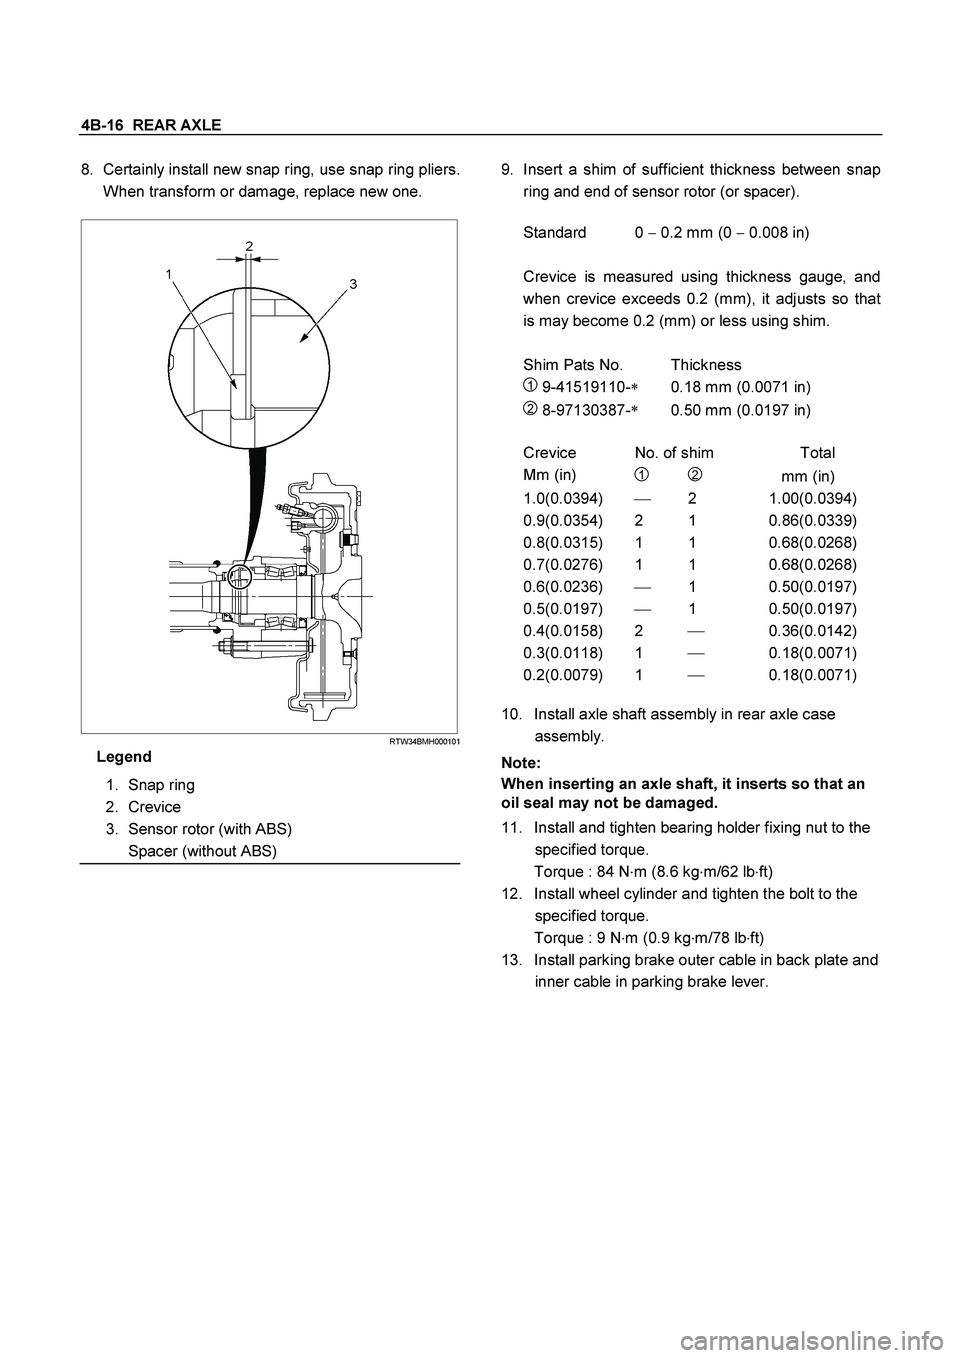 ISUZU TF SERIES 2004  Workshop Manual 4B-16  REAR AXLE
 
8. 
Certainly install new snap ring, use snap ring pliers.
When transform or damage, replace new one. 
 
  
 
RTW34BMH000101
Legend
 
 
1. 
Snap ring 
 
2. 
Crevice 
 3. 
Sensor rot